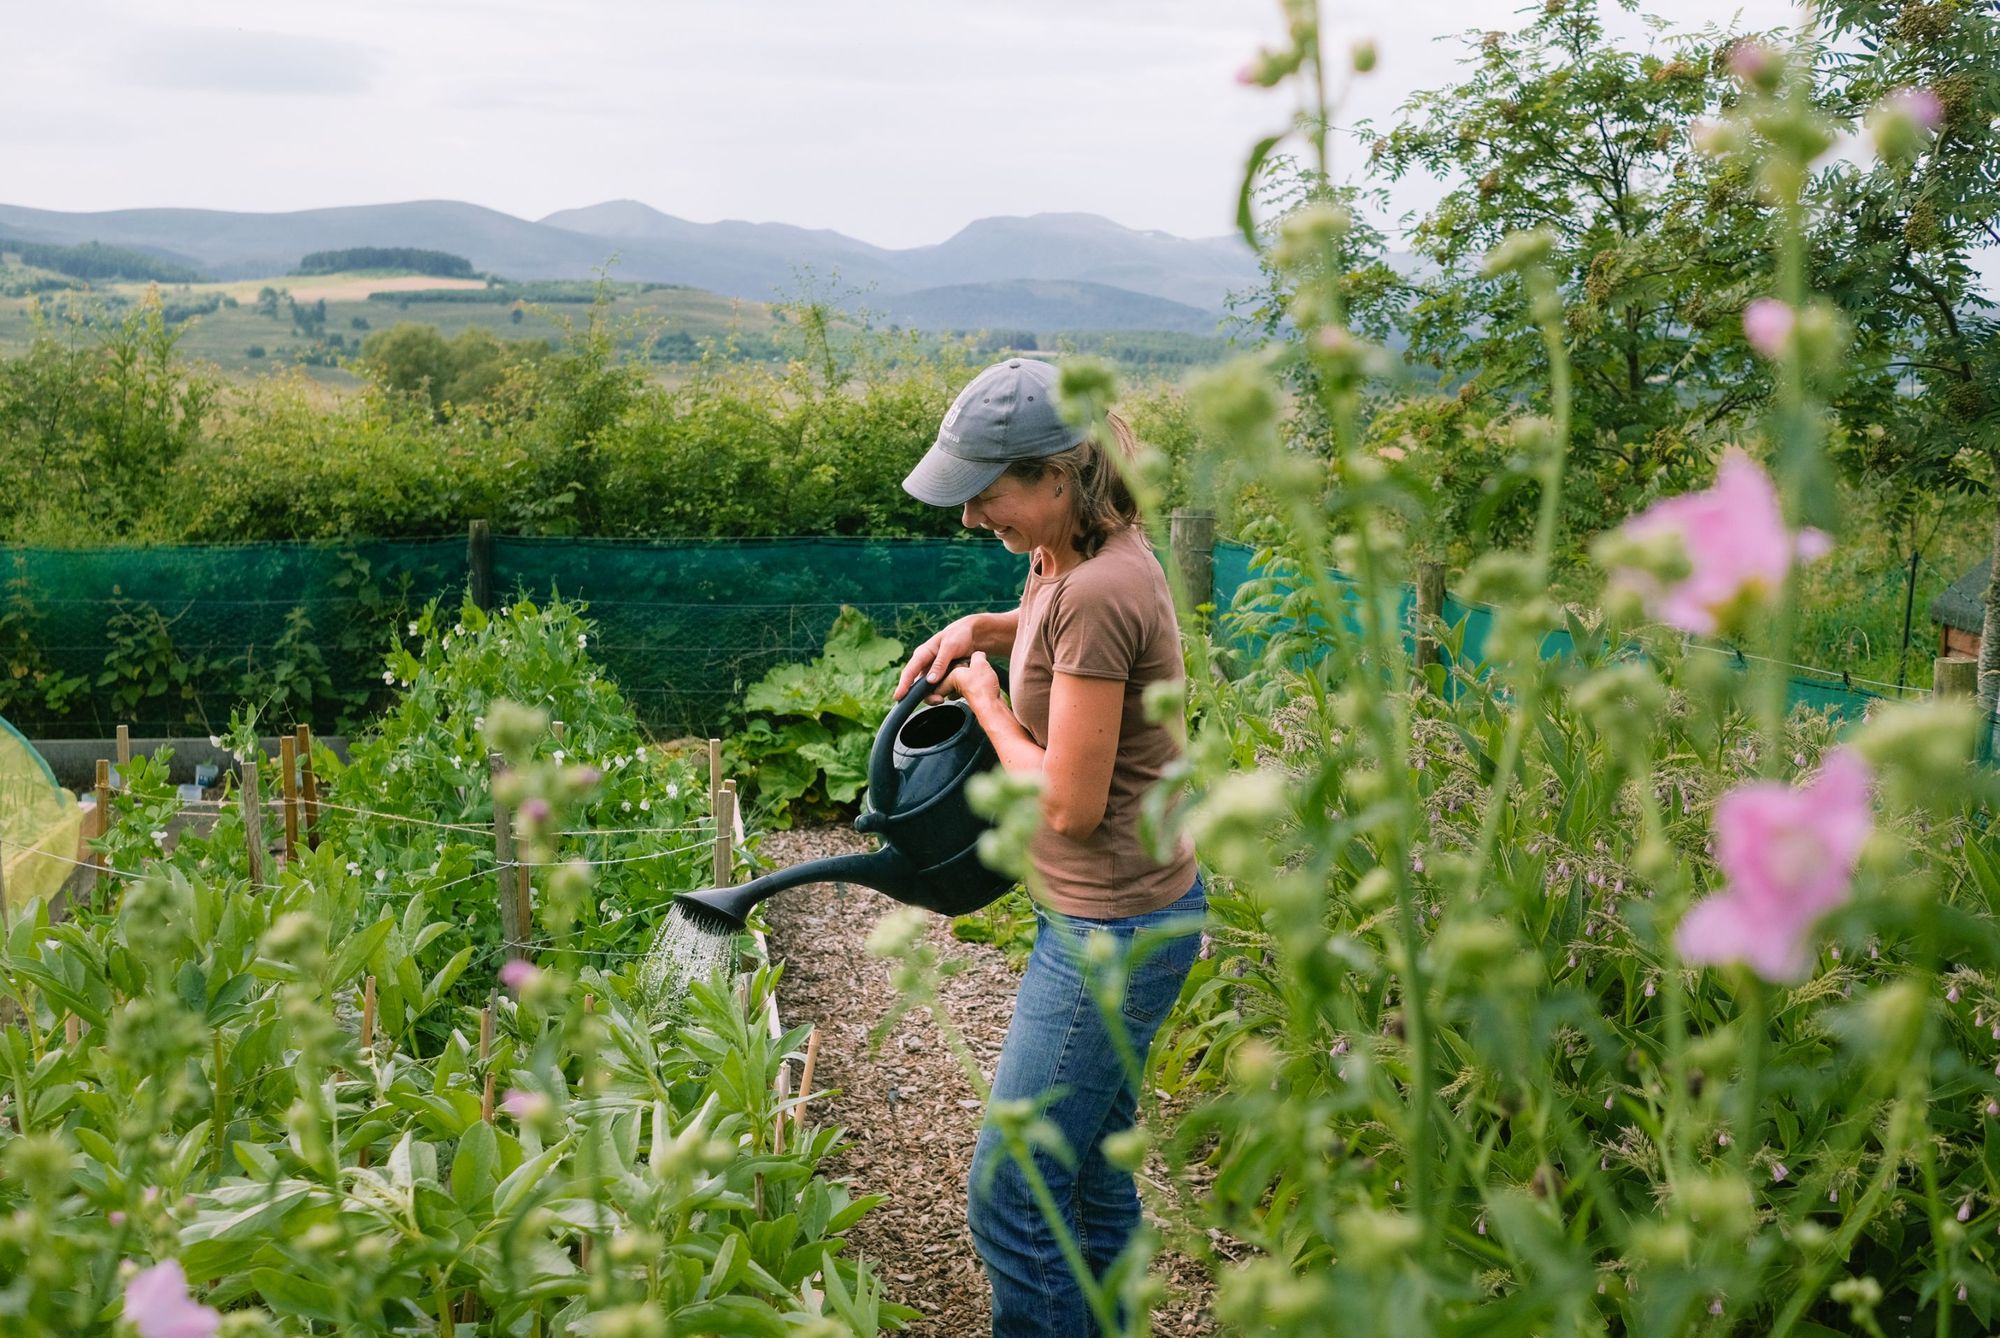 A woman waters vegetables in the garden of a Highland croft.